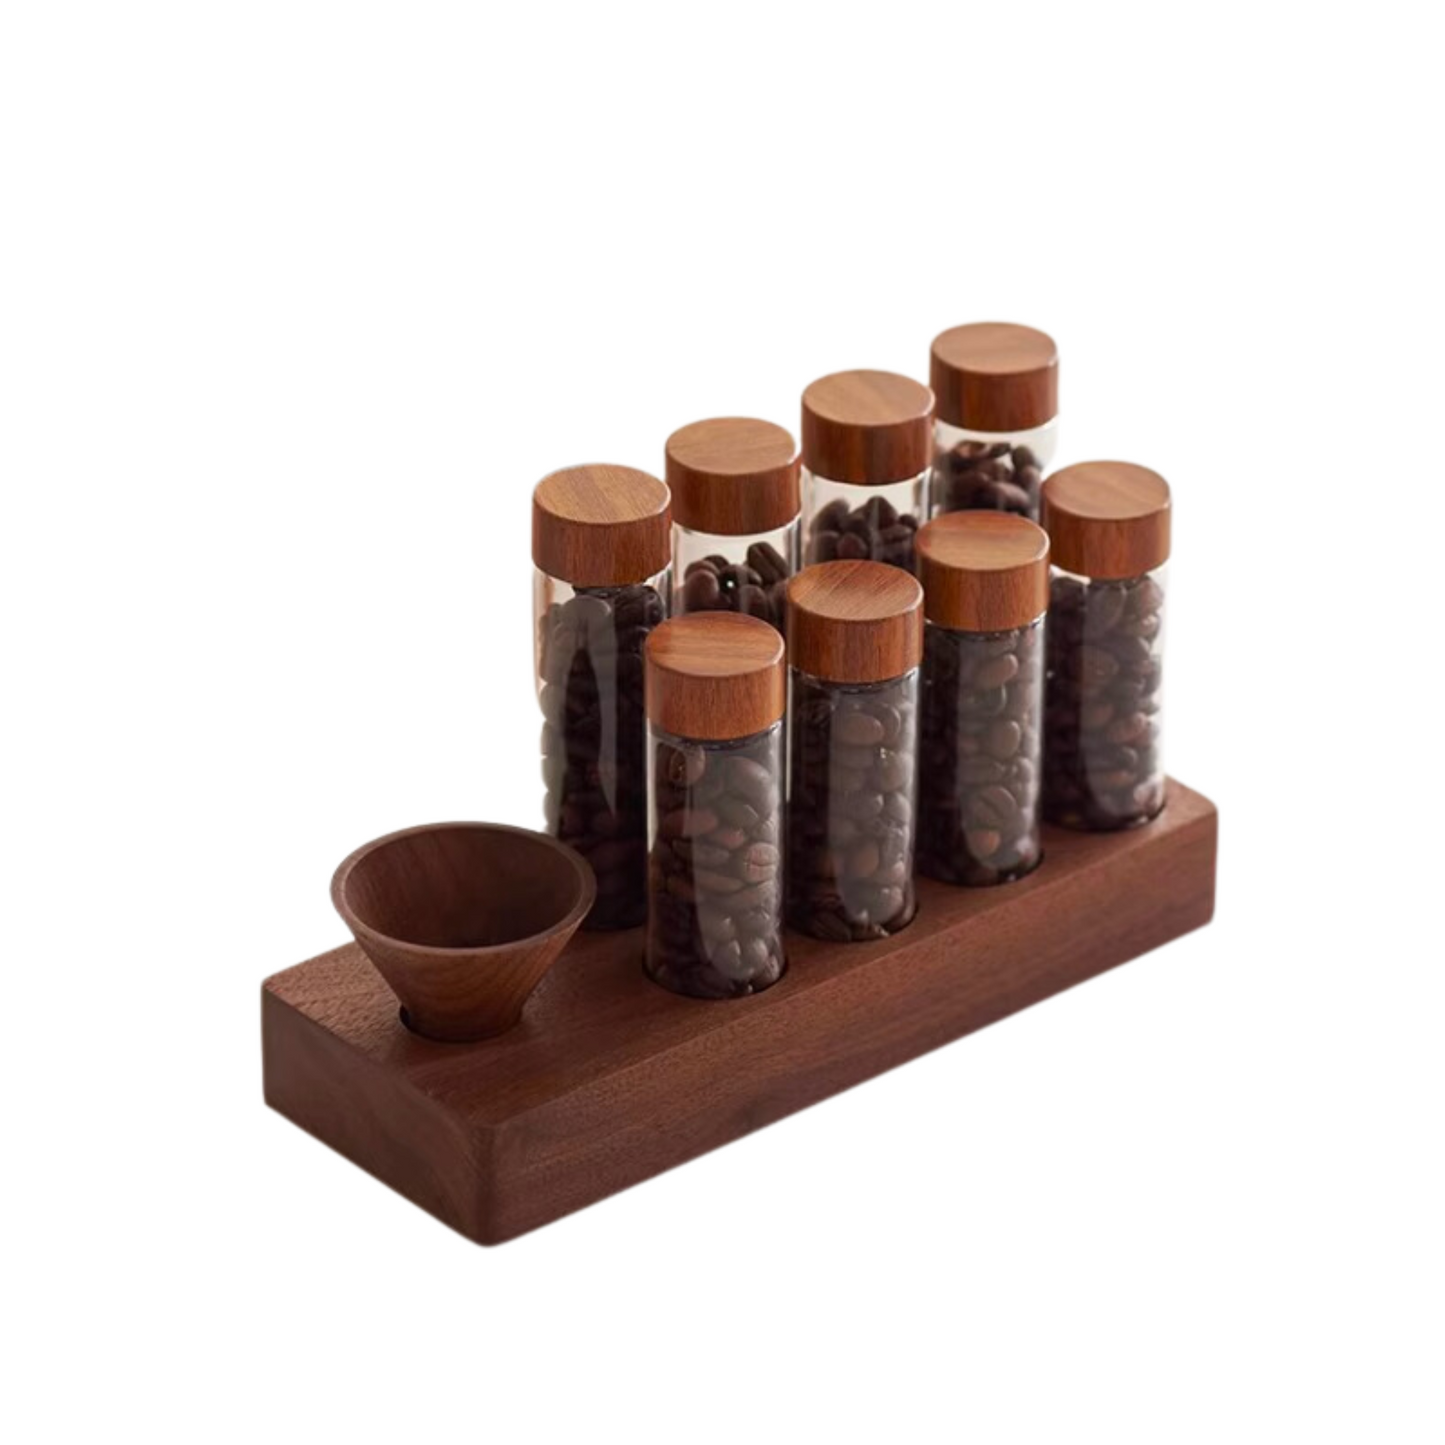 Single Dose Bean Cellar with Walnut Wood Display Rack and Funnel